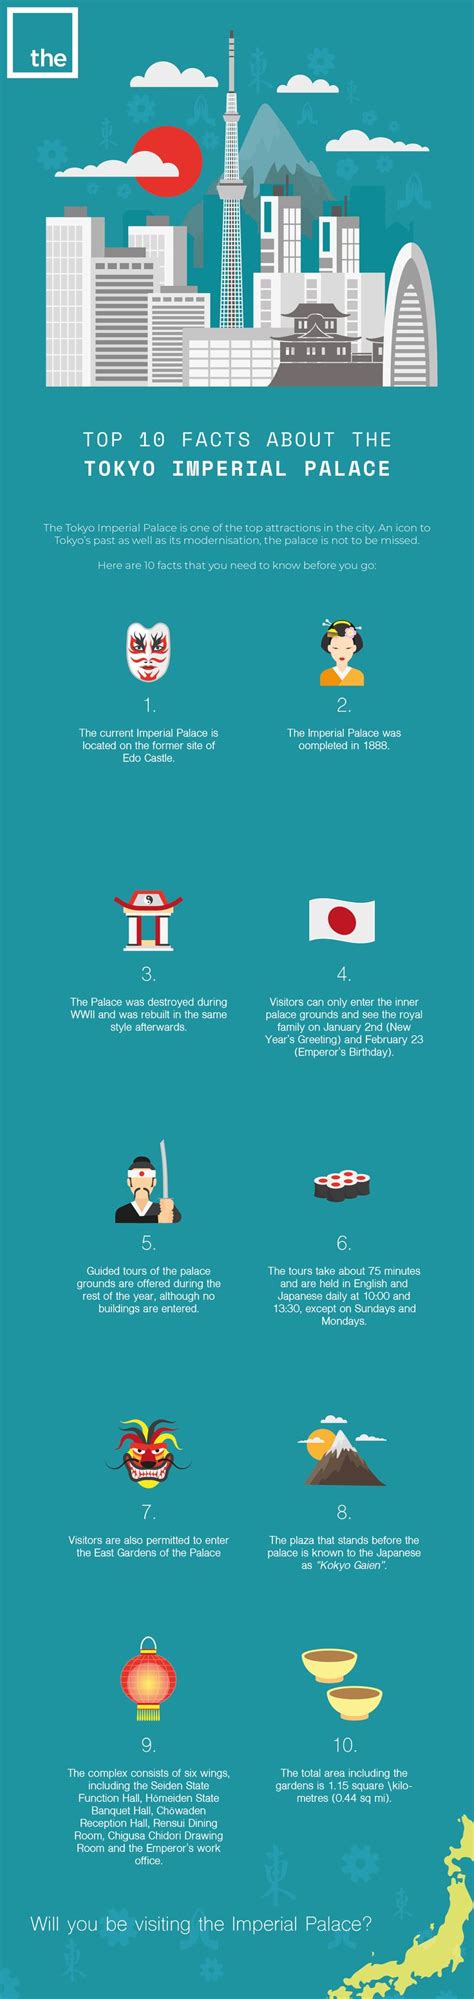 Top 10 Facts About the Tokyo Imperial Palace | Tokyo imperial palace, Imperial palace ...